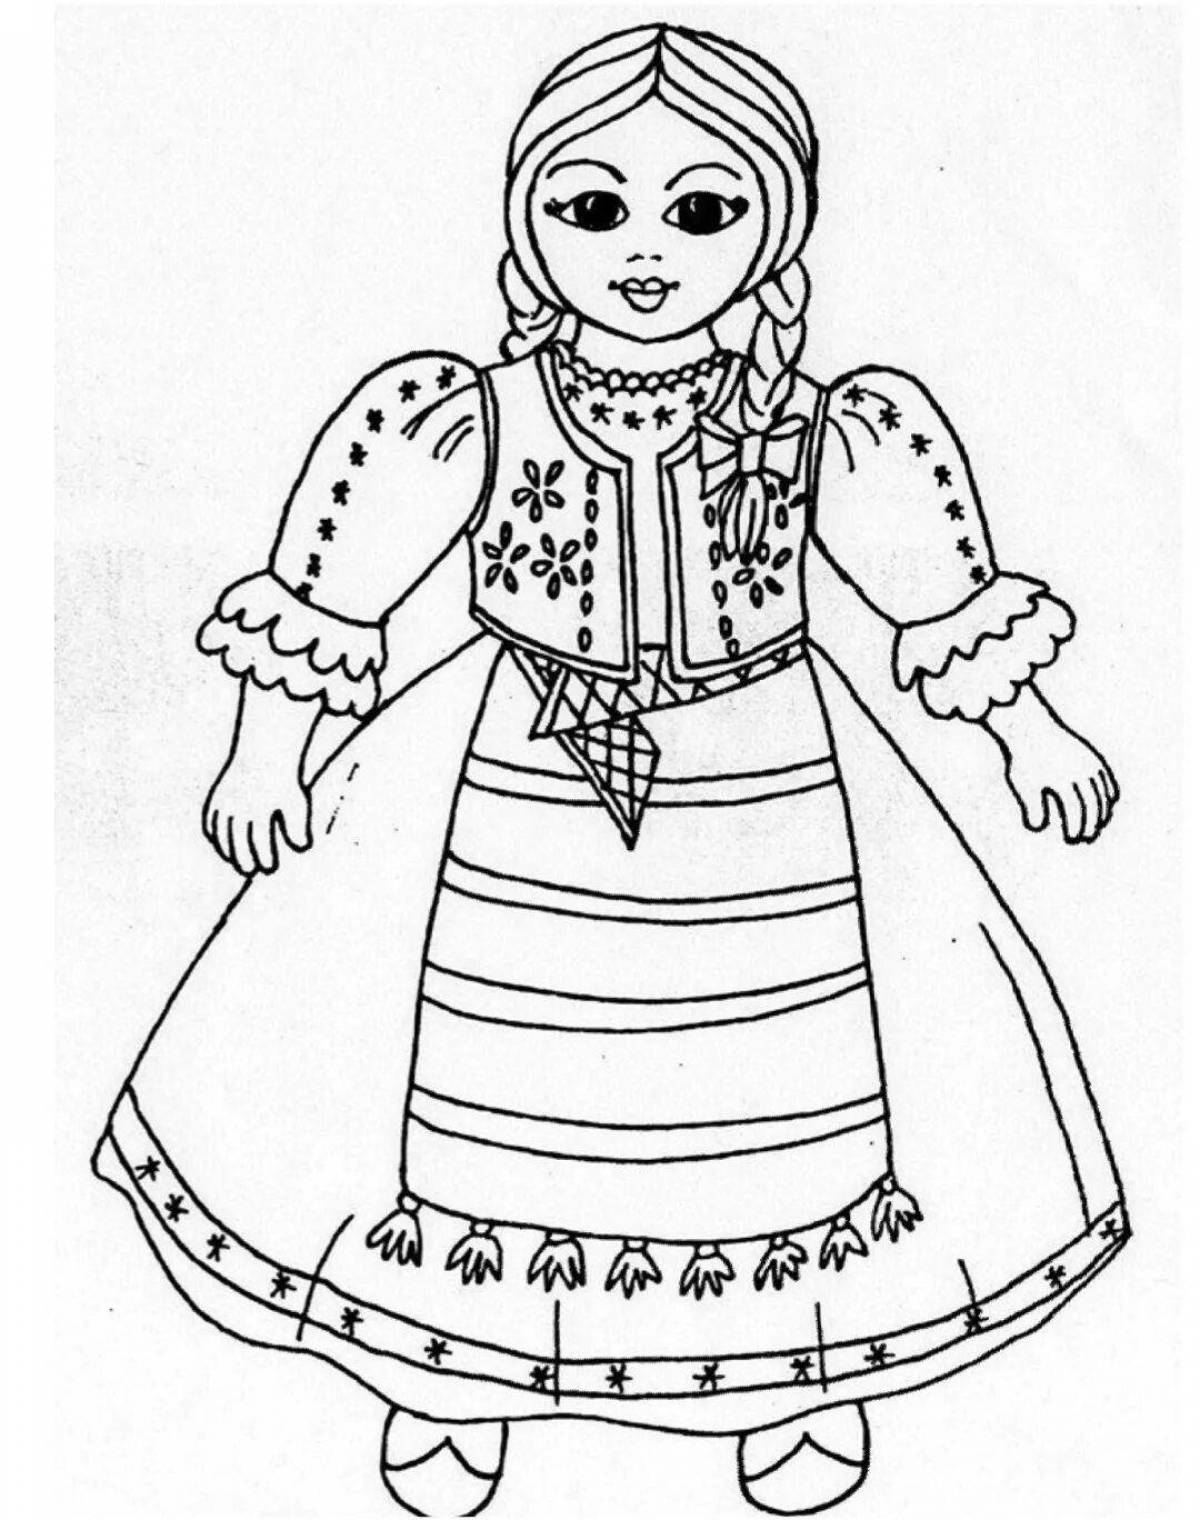 Coloring page joyful Russian folk clothes